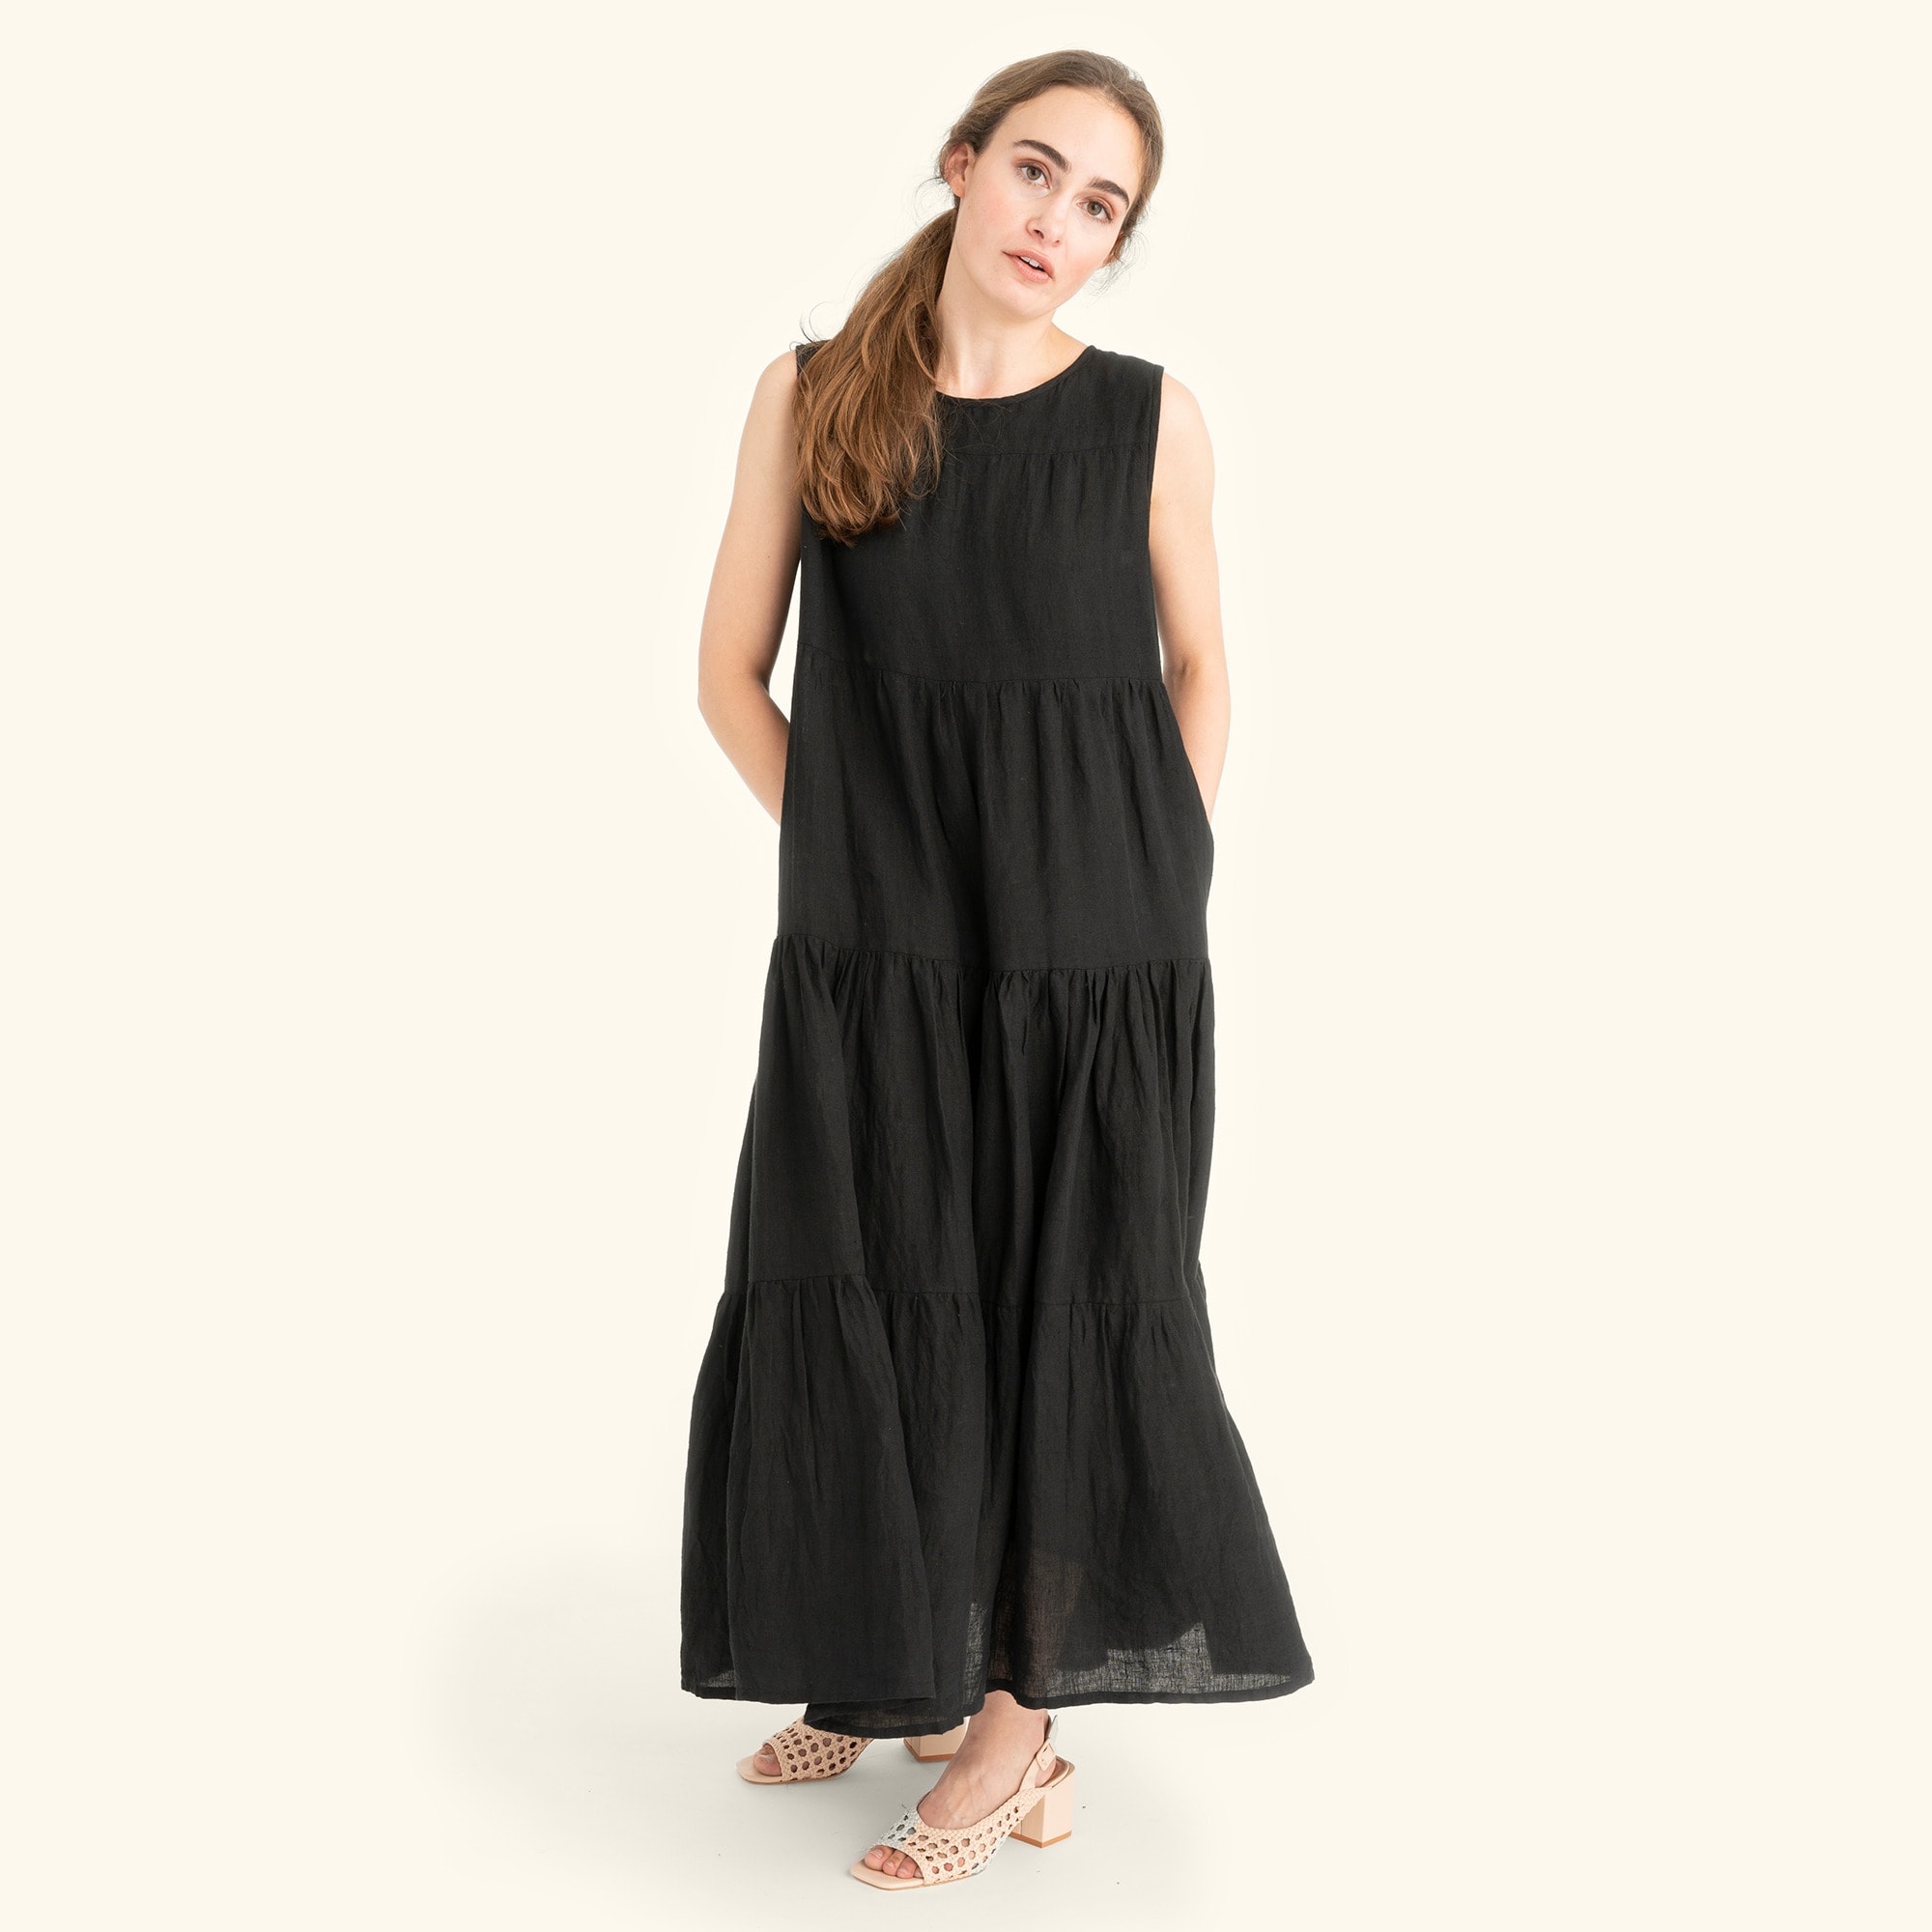 J.Crew: LAUDE The Label Tiered Maxi Dress For Women